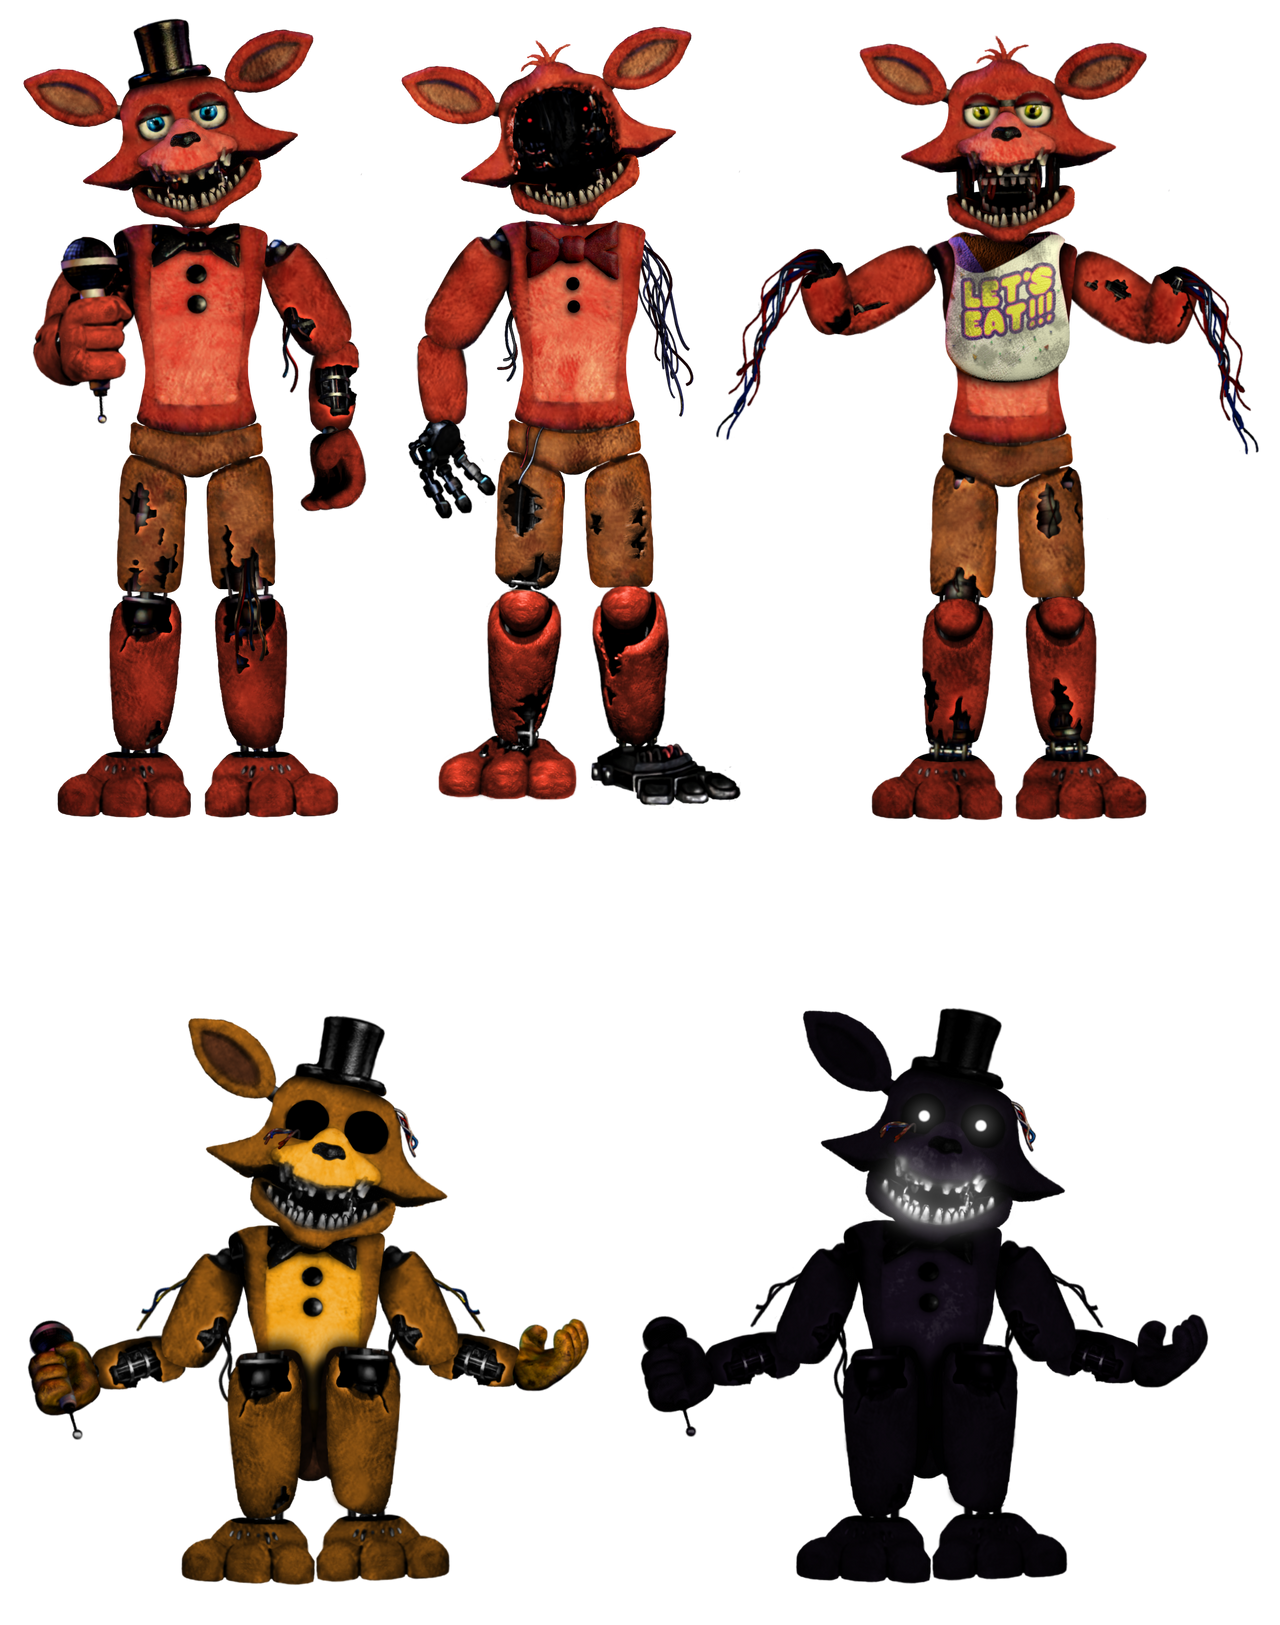 Swapped withered foxy by fnafspeedfan2 on DeviantArt